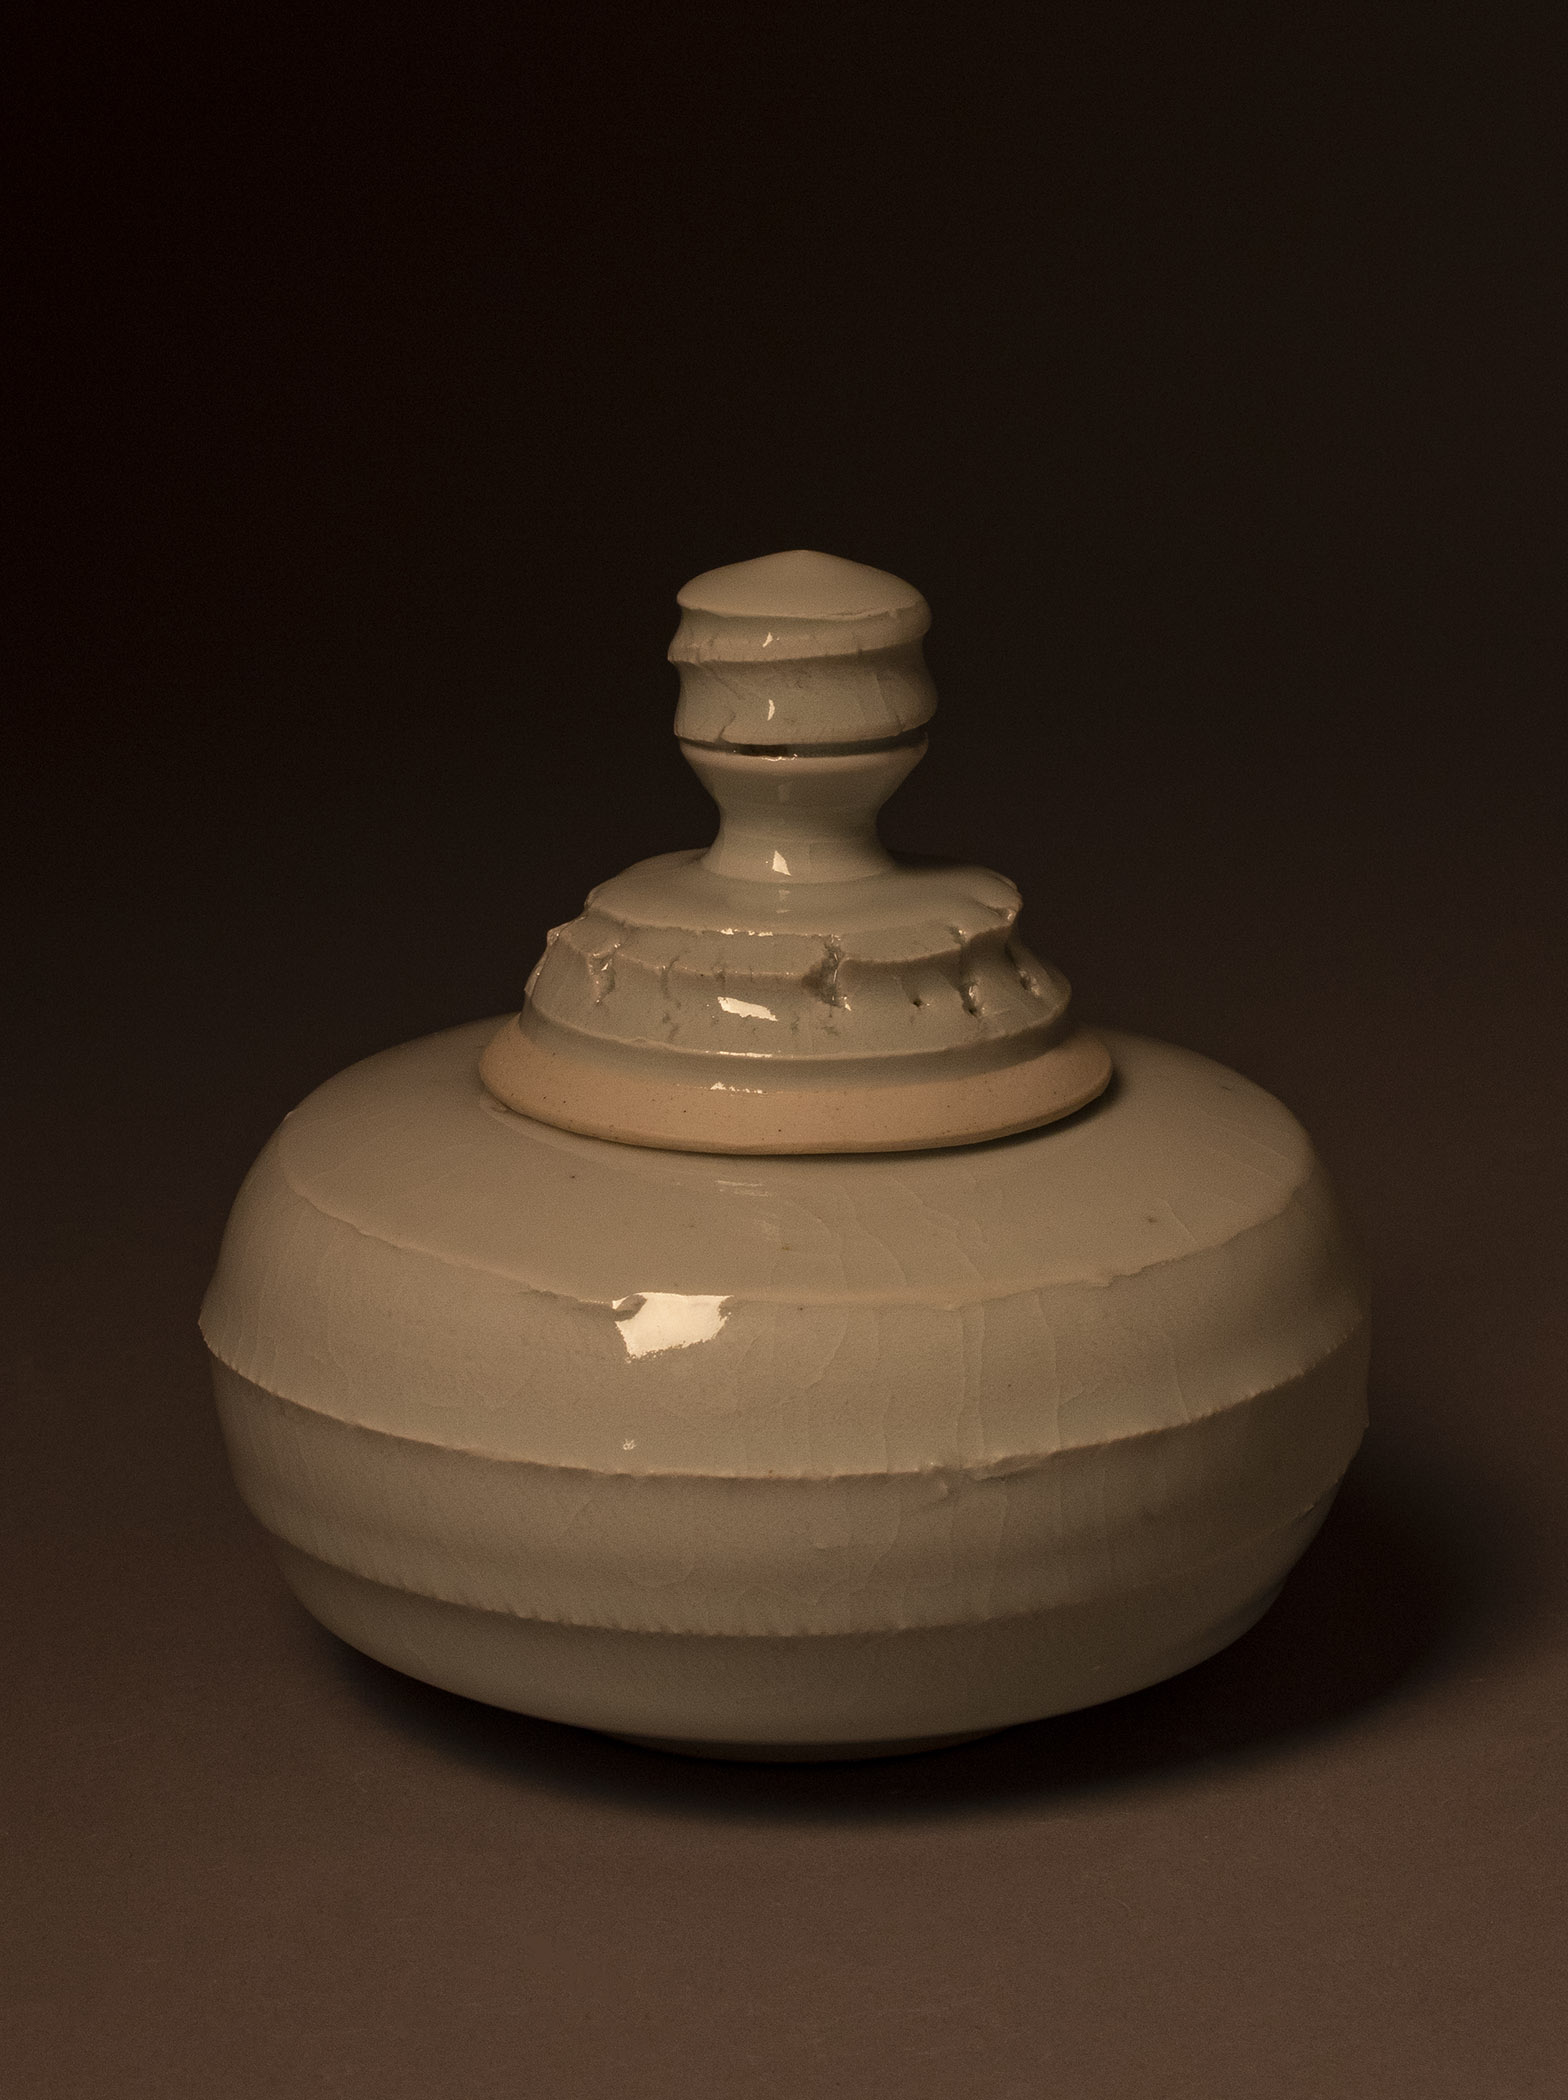 A similar shape to the one previously described, the textural element on the bottom of the jar is much more pronounced. While the shoulder of the piece is smooth and nearly flat, the body of the jar has a texture that might resemble a craggy rockface or even something akin to the tread on a dry-rotting tire. Like the other porcelain pieces, the glaze is glassy and relatively smooth.